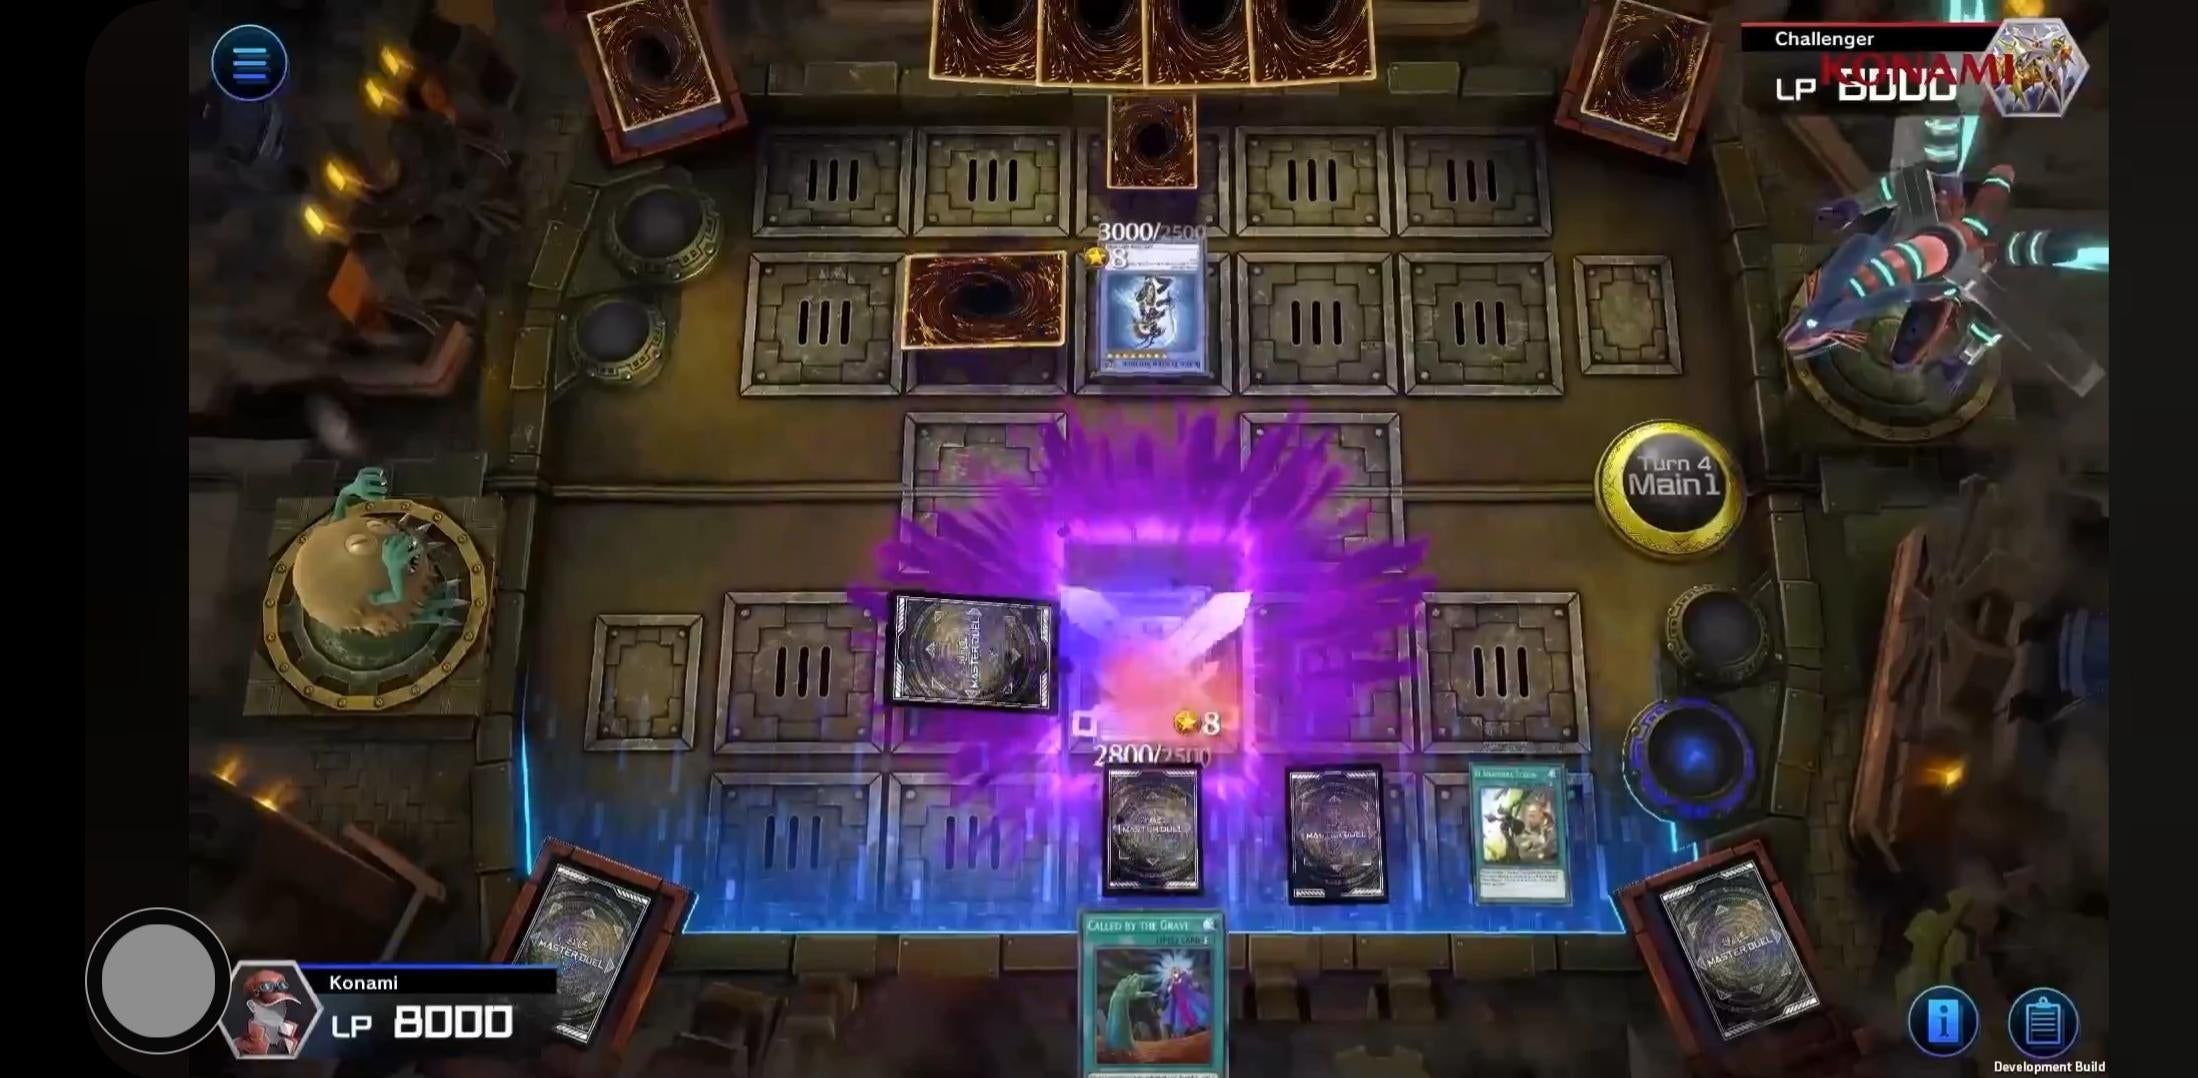 yugioh master duel gameplay footage from game development 